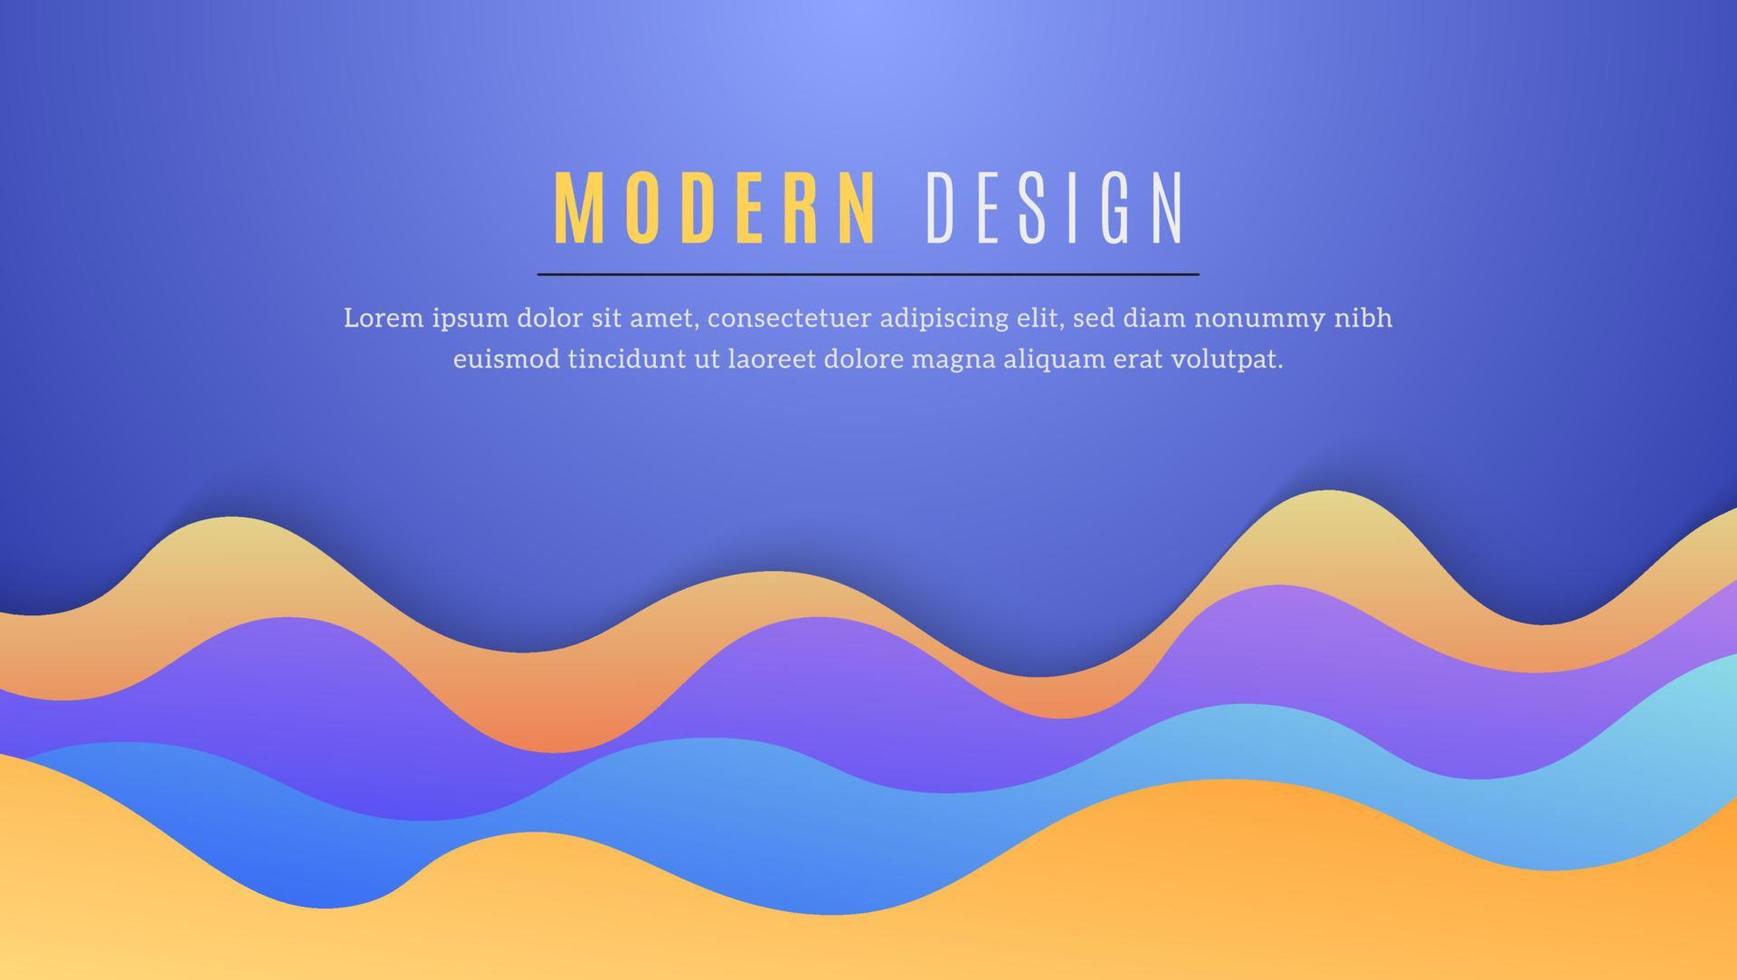 Abstract Modern Gradient Colorful Waves Shape Background Design vector